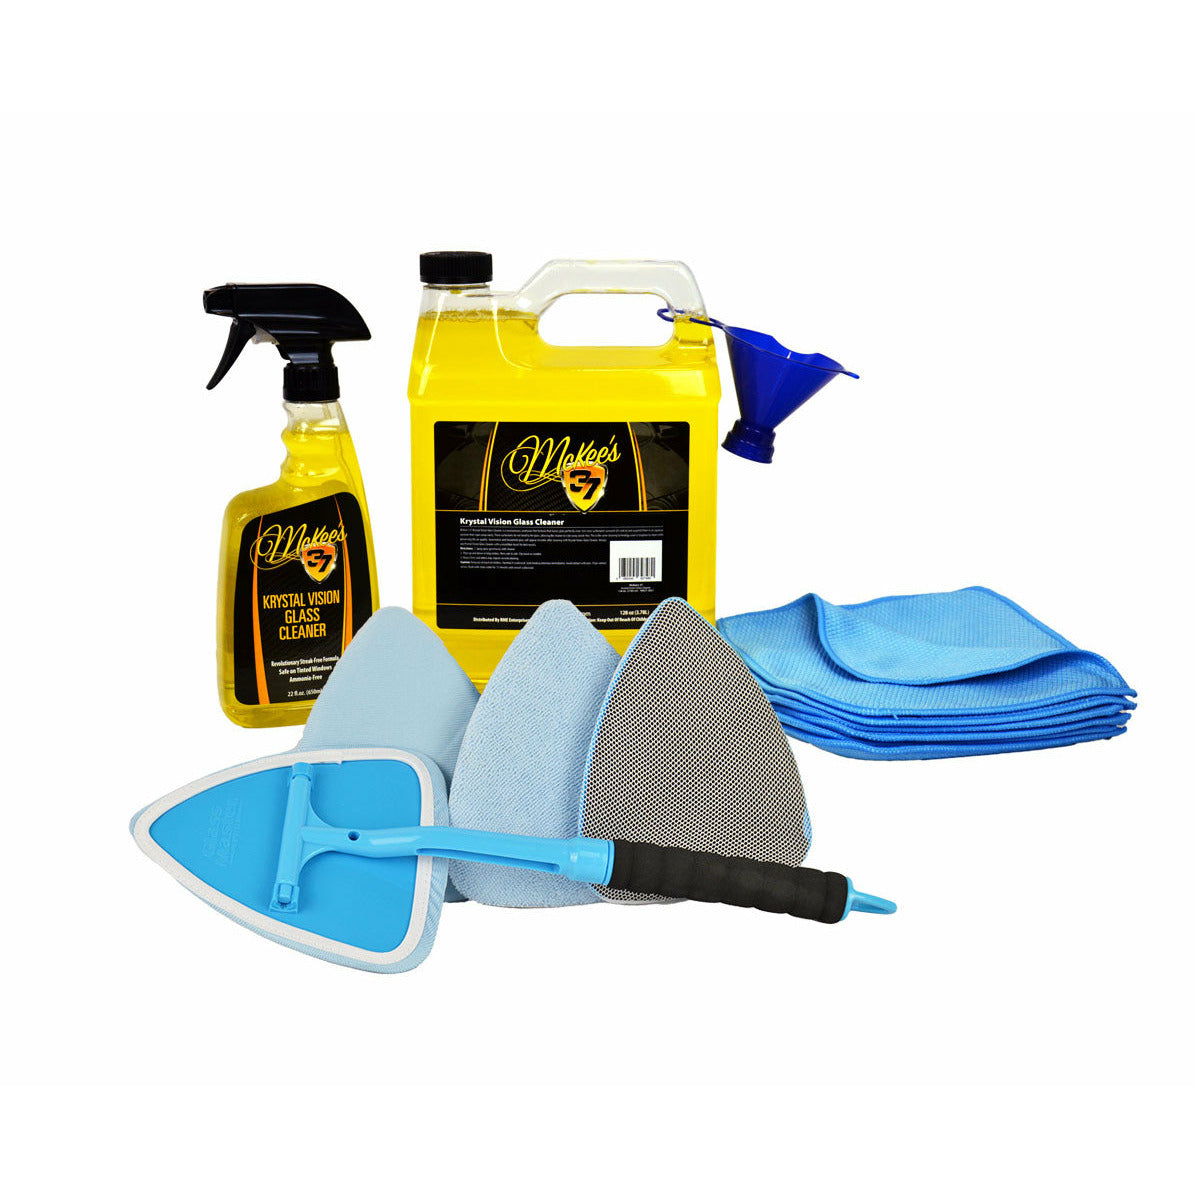 Caring For Your Case – Novus Acrylic Cleaning Kit, Swiffer Dusters – Better  Display Cases